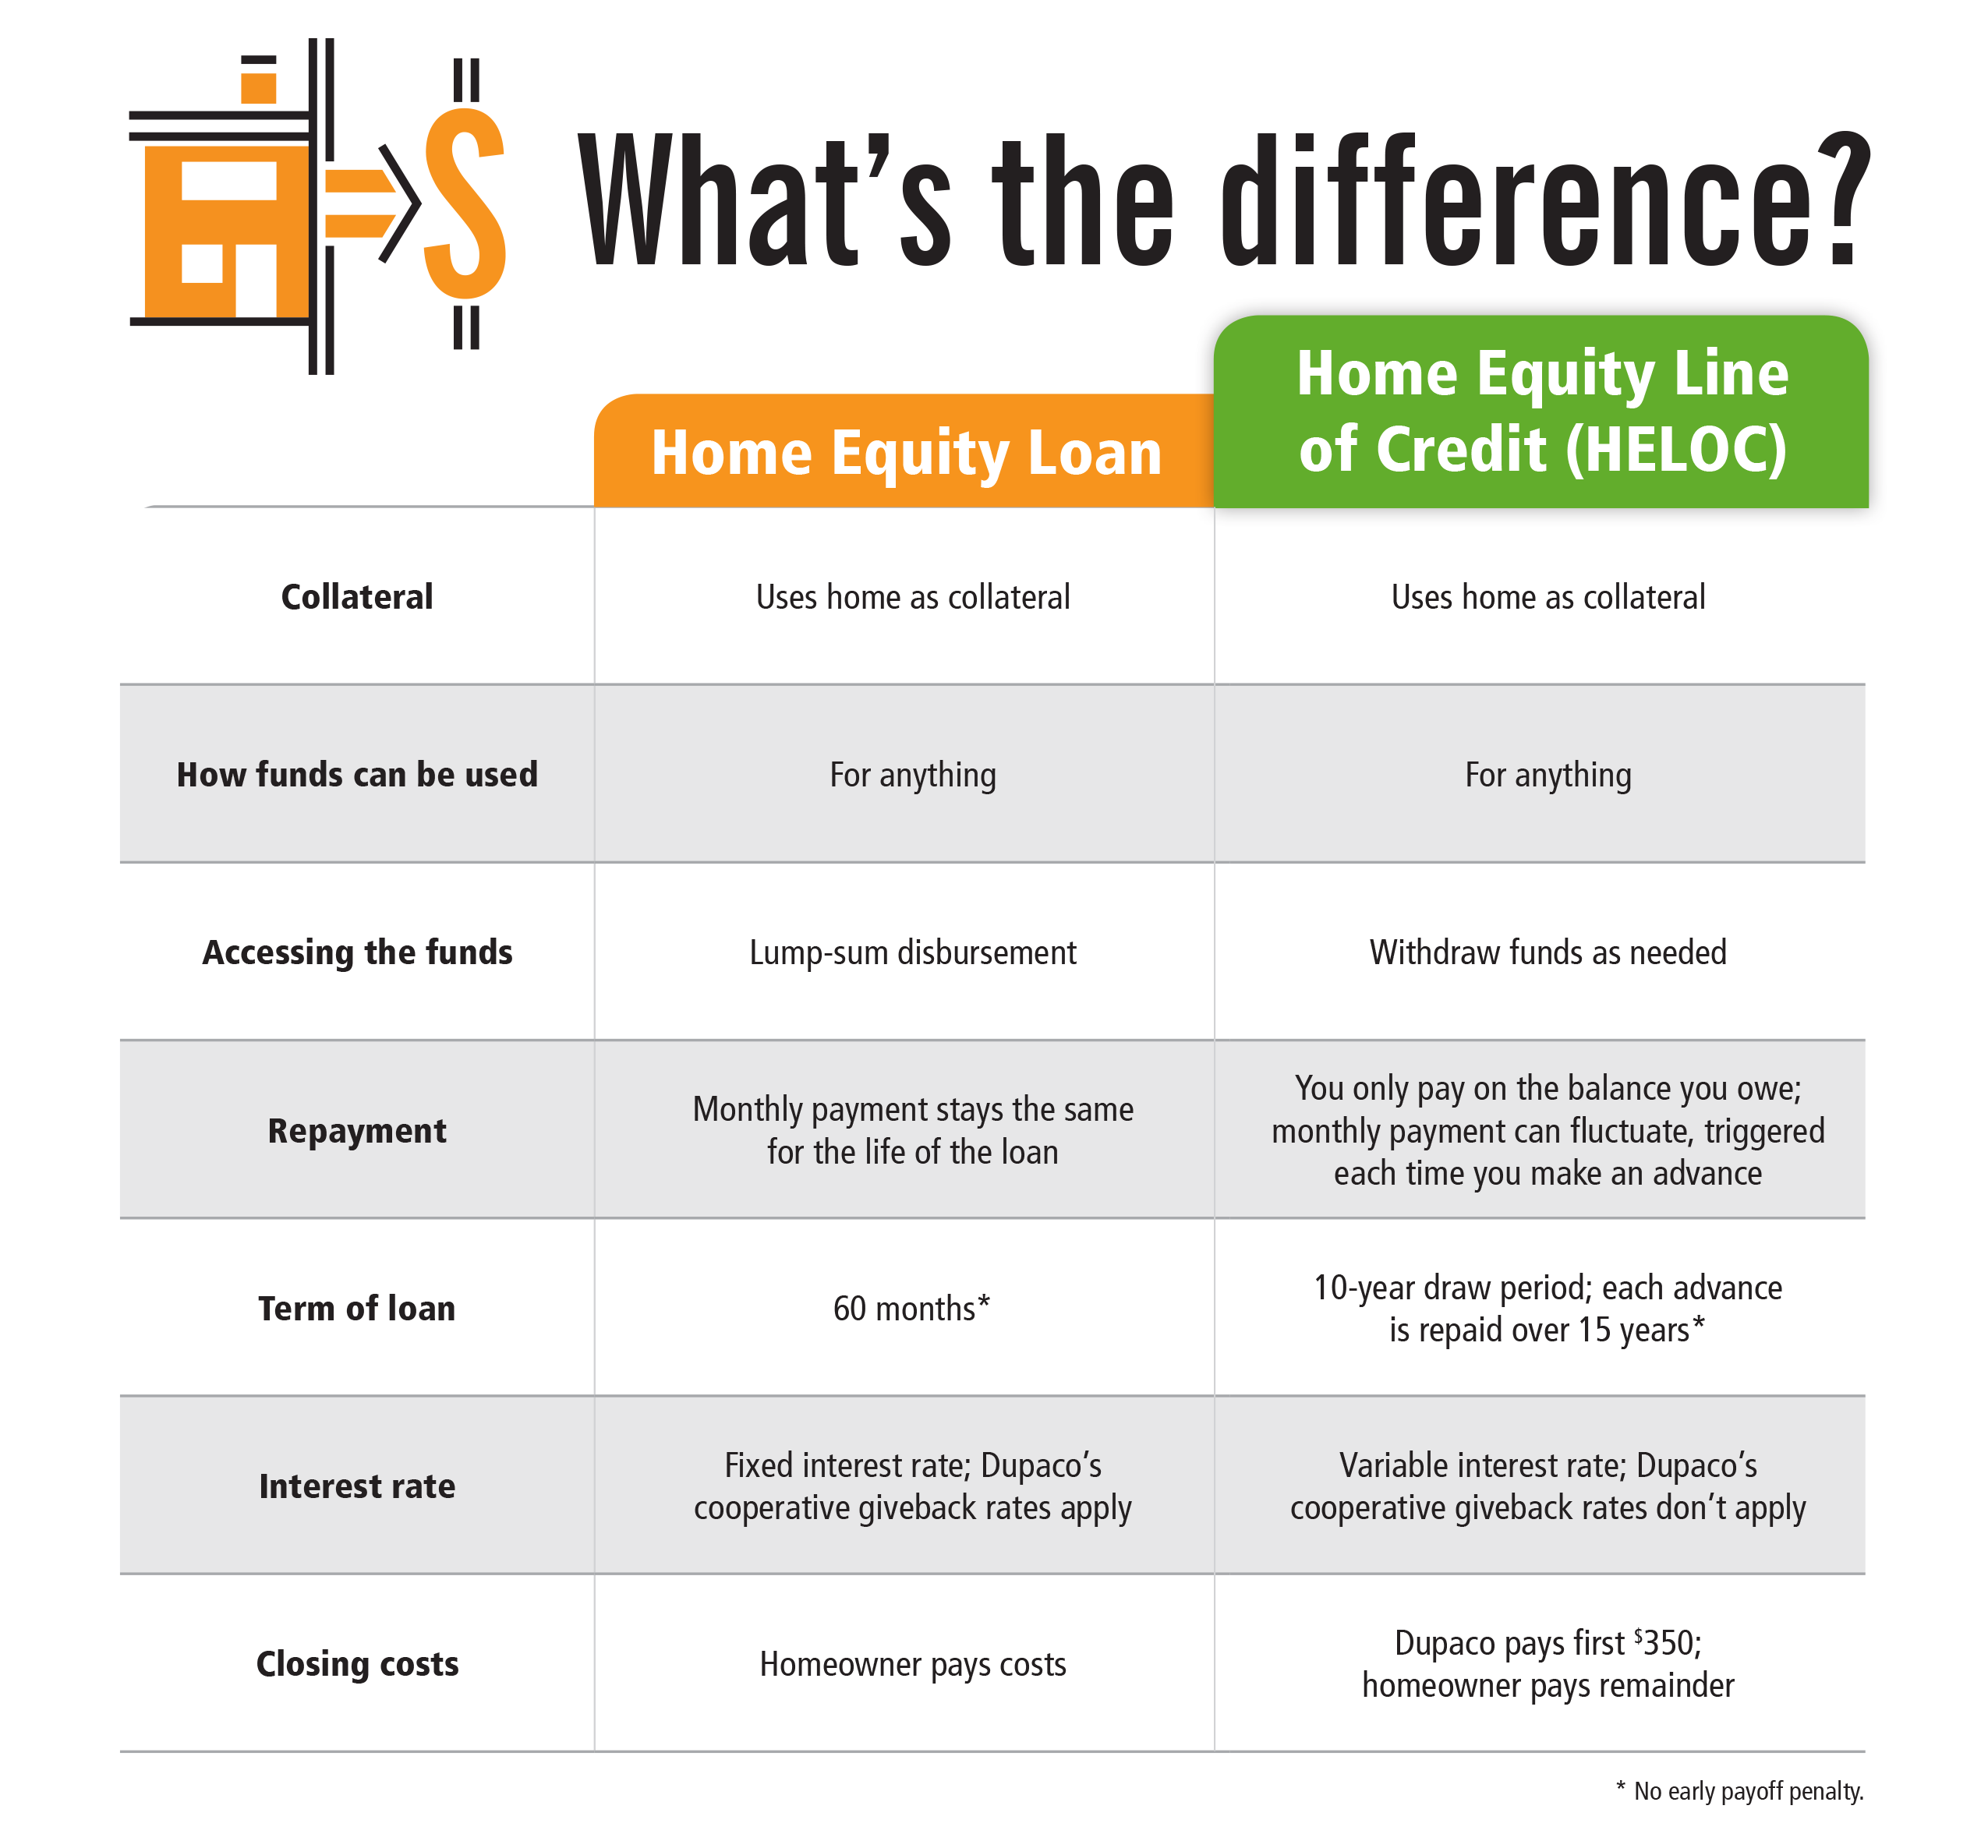 Home equity loan or line of credit: Which is right for you? - Dupaco